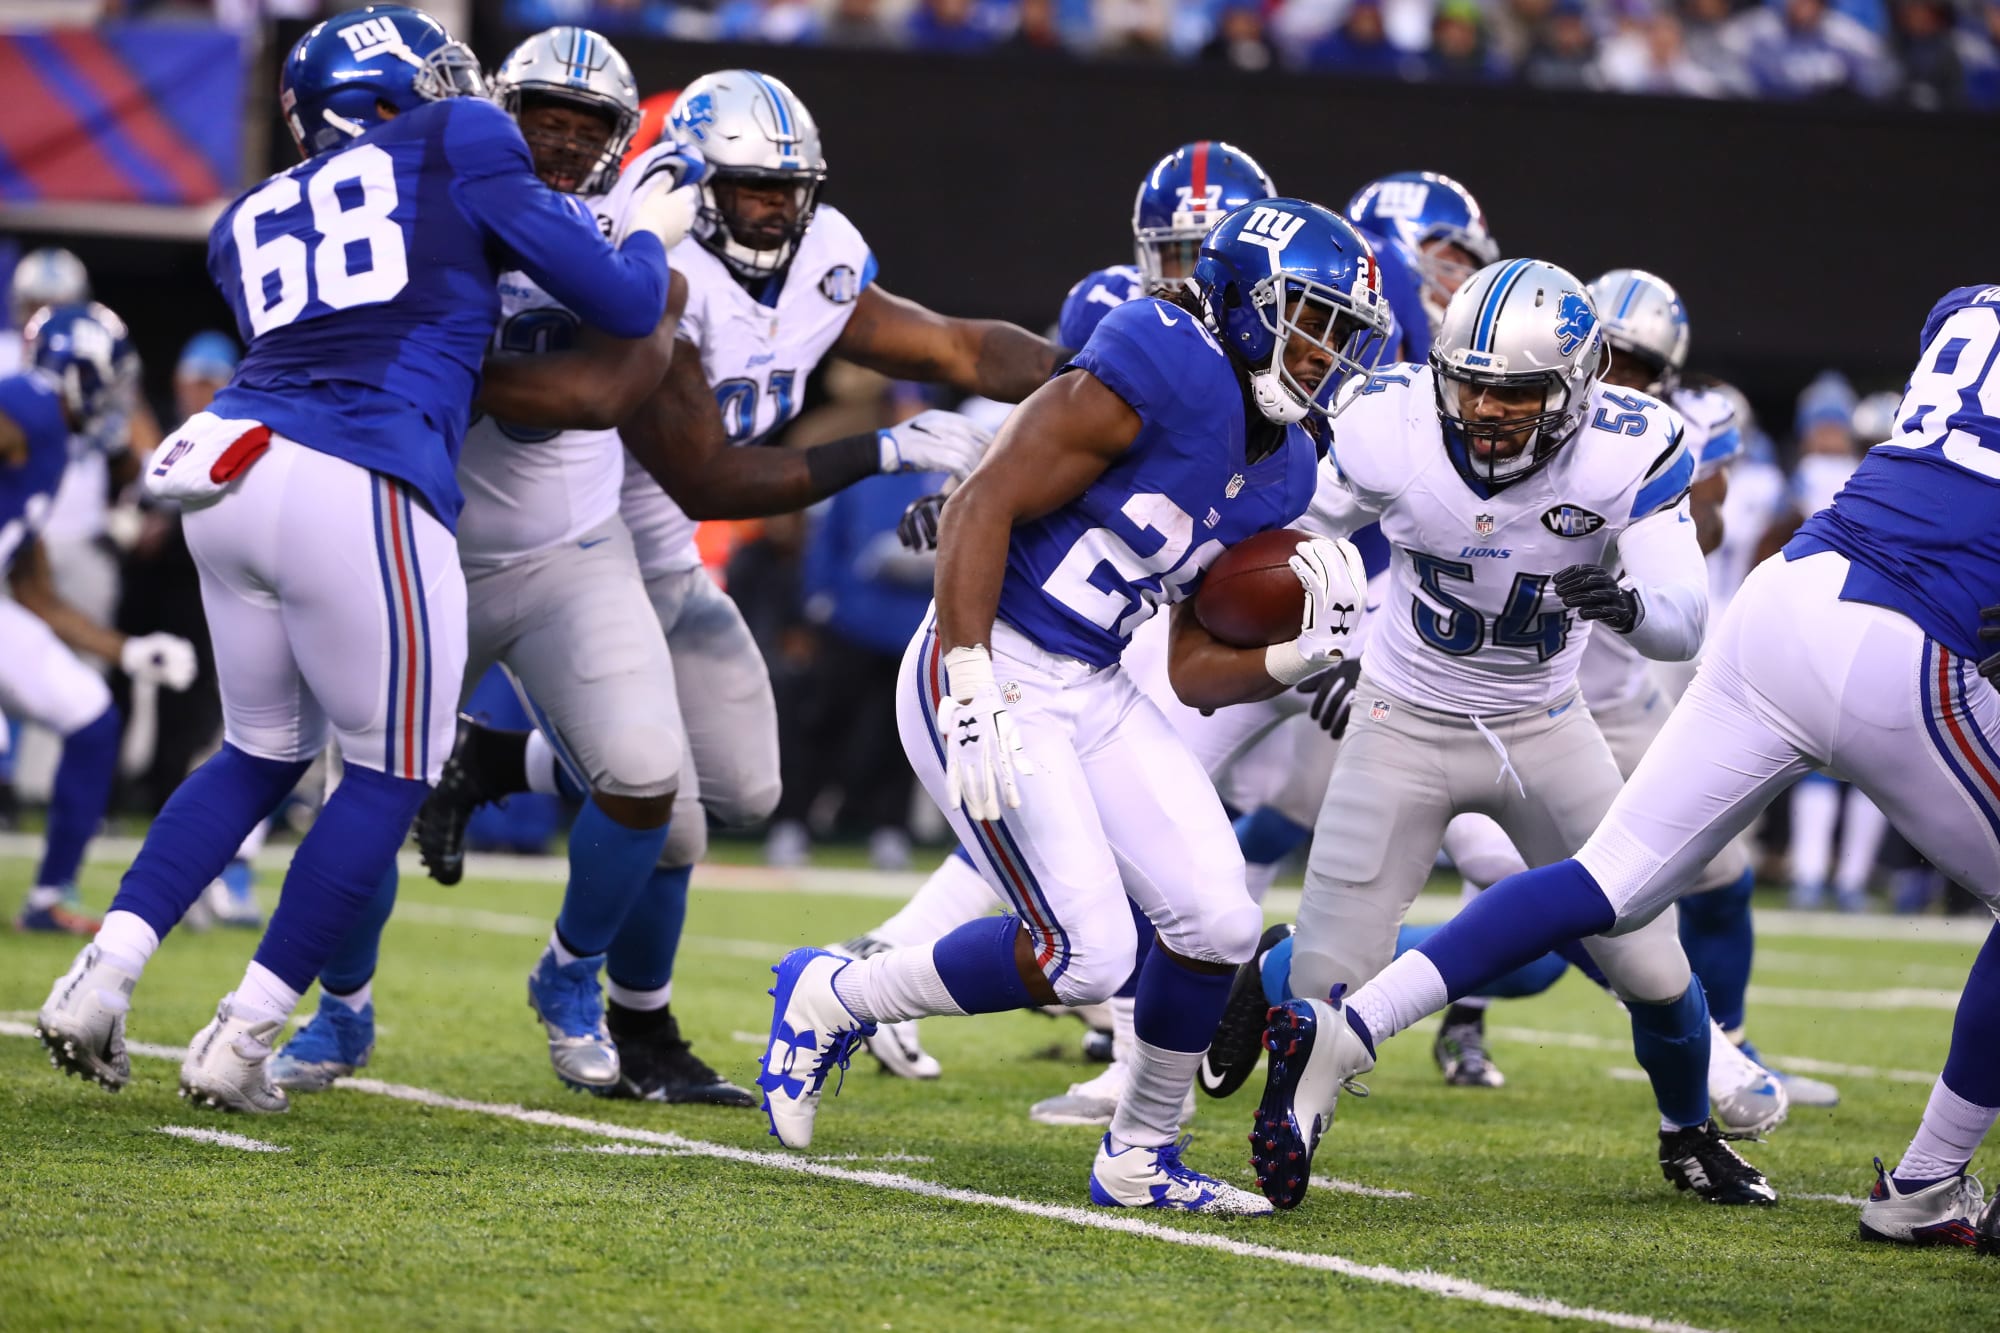 New York Giants vs. Detroit Lions Where to watch, listen and more